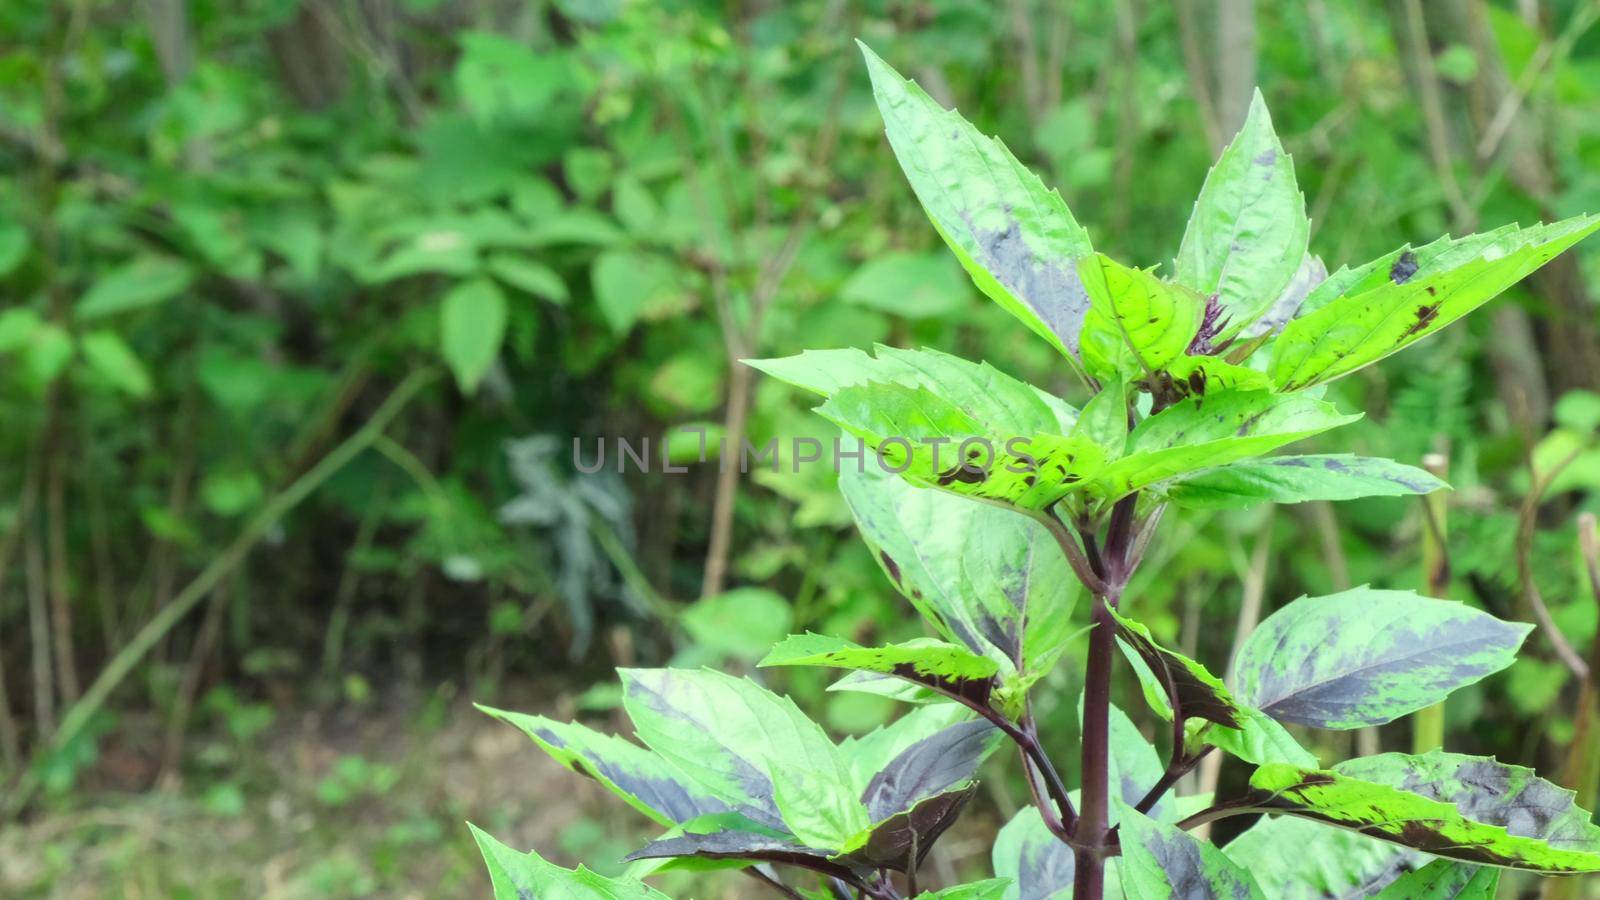 A hybrid of green and purple basil sways in the wind with copyspace. Basil grows outdoors in the garden. The concept of a vegetable garden, medicinal herbs and plants